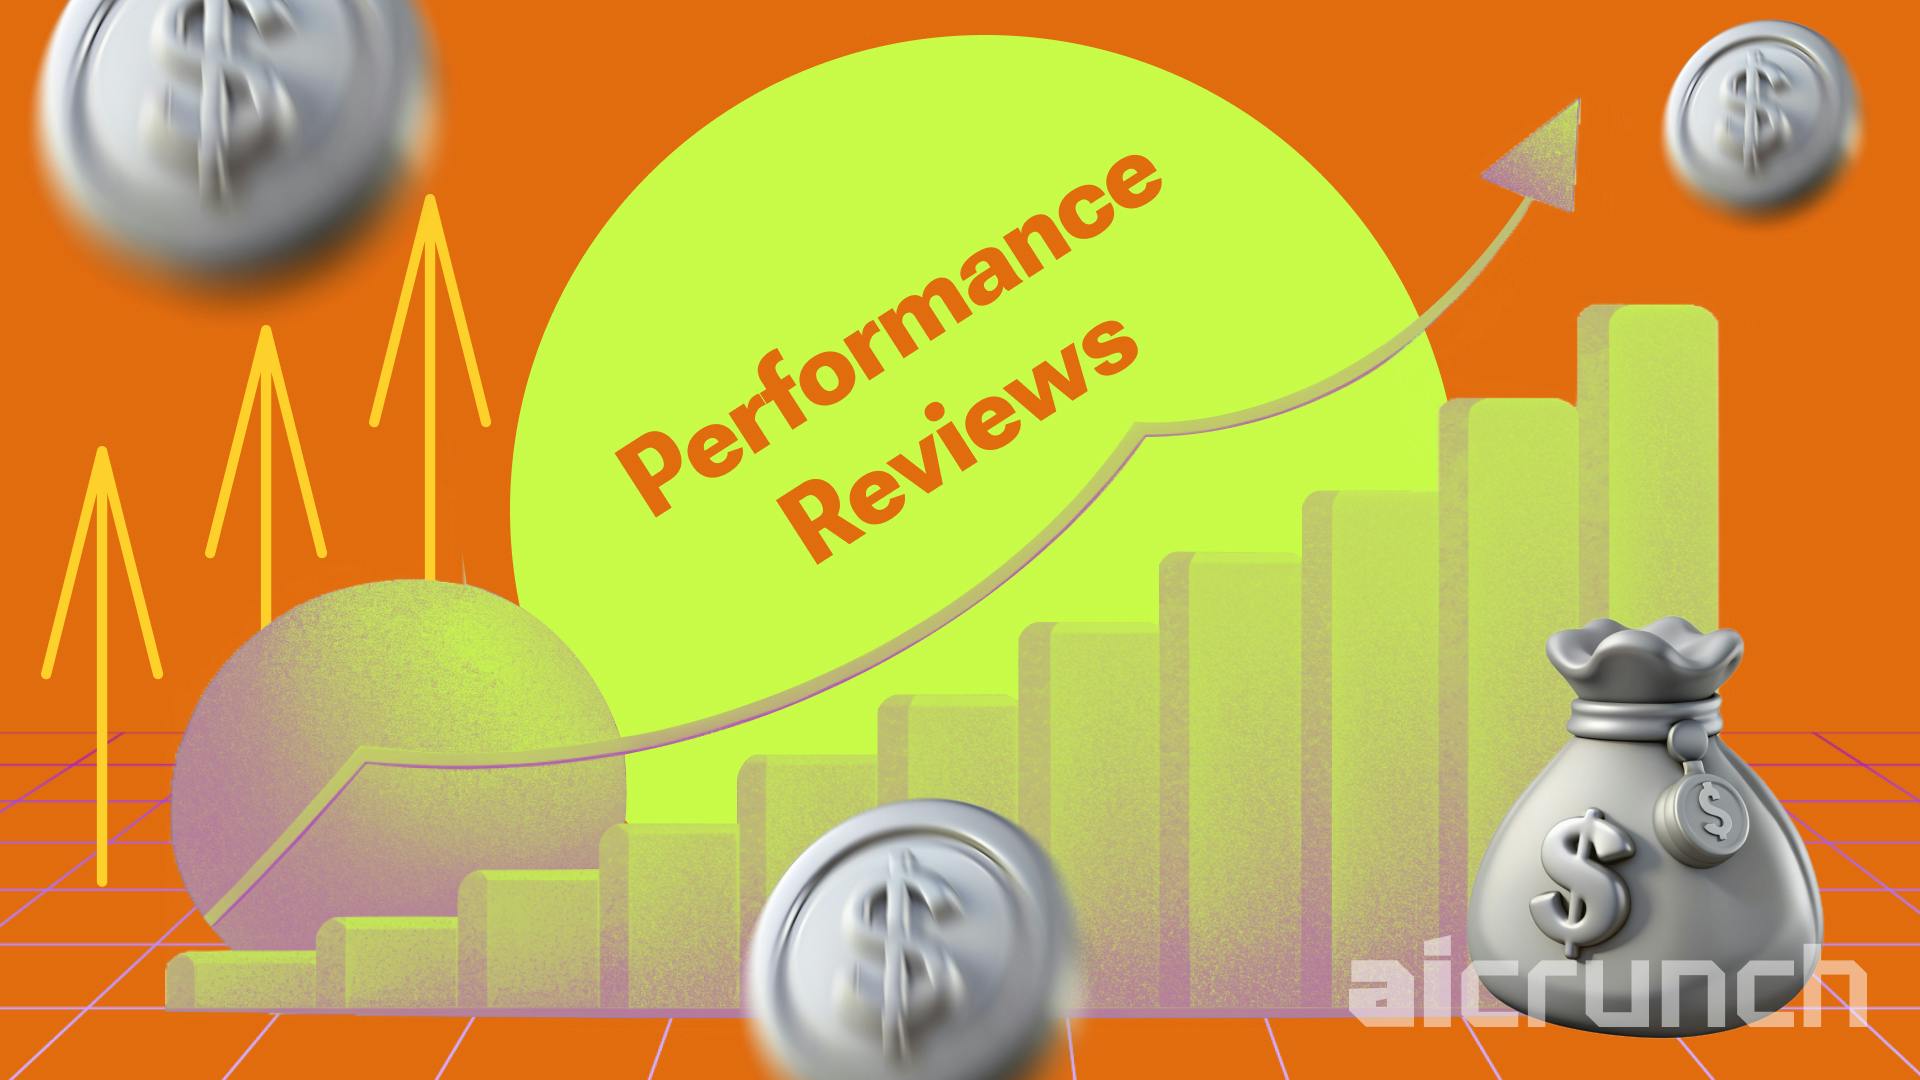 SMART Performance Reviews: Key to Employee Development and Company Success